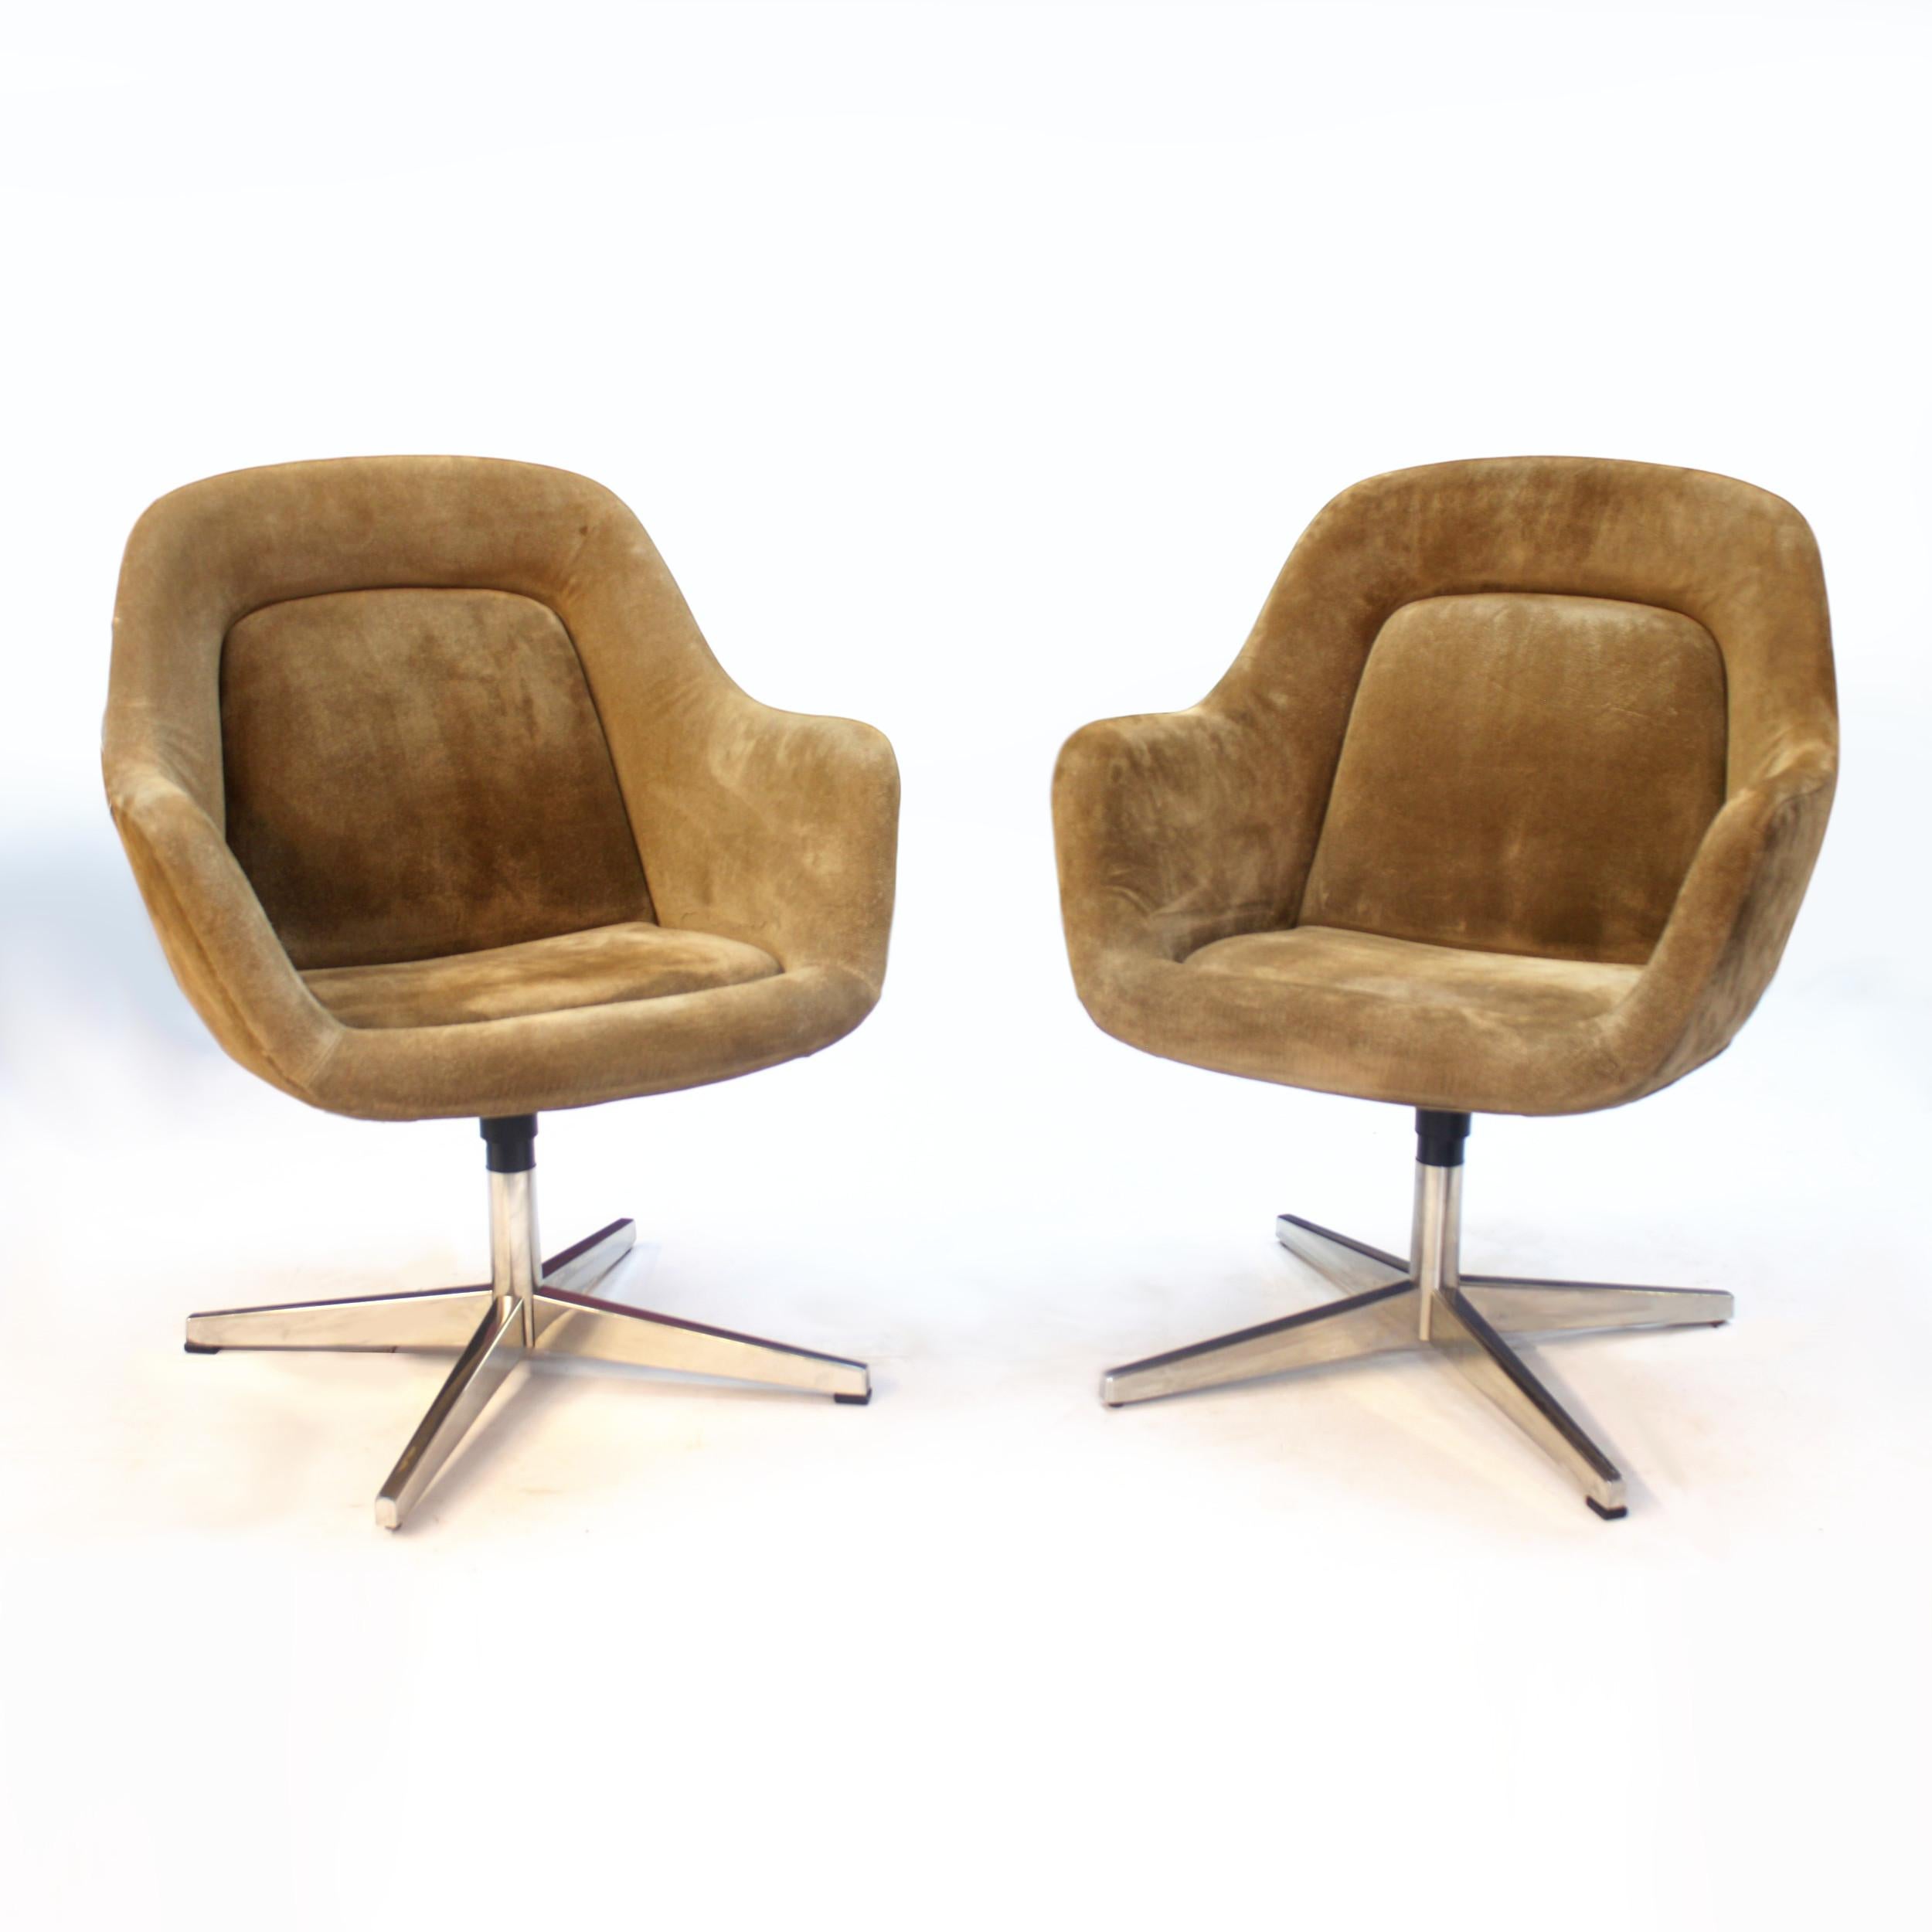 Very nice pair of side chairs designed by Max Pearson for Knoll. Chairs feature rare light-brown suede upholstery, chrome swivel bases, and wonderful midcentury lines. Very comfy and would make a great addition to any midcentury home or office.